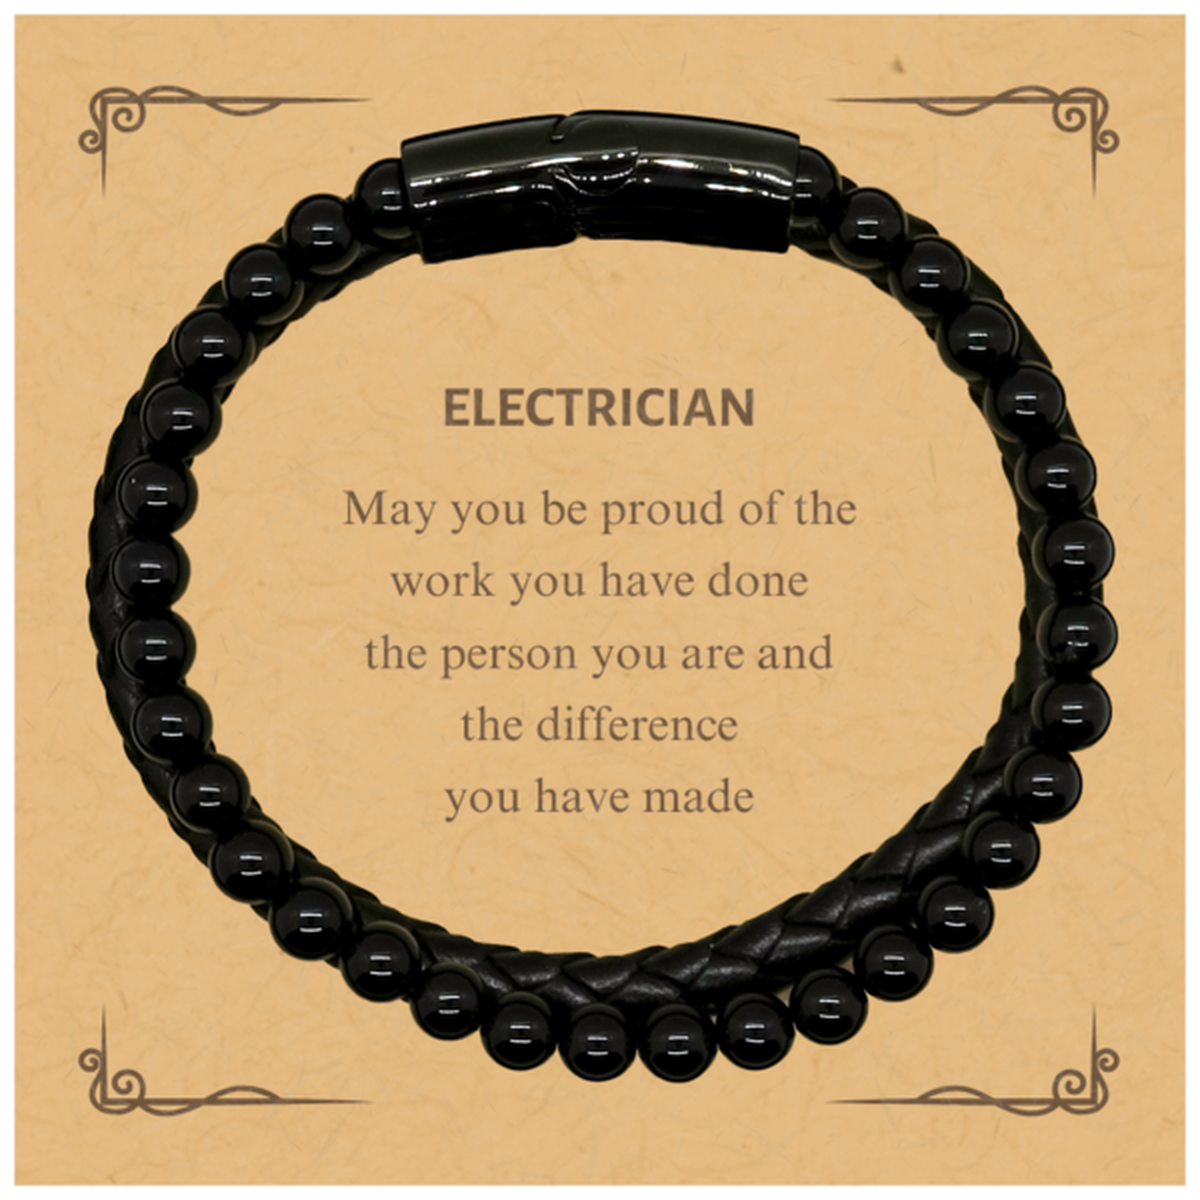 Electrician May you be proud of the work you have done, Retirement Electrician Stone Leather Bracelets for Colleague Appreciation Gifts Amazing for Electrician